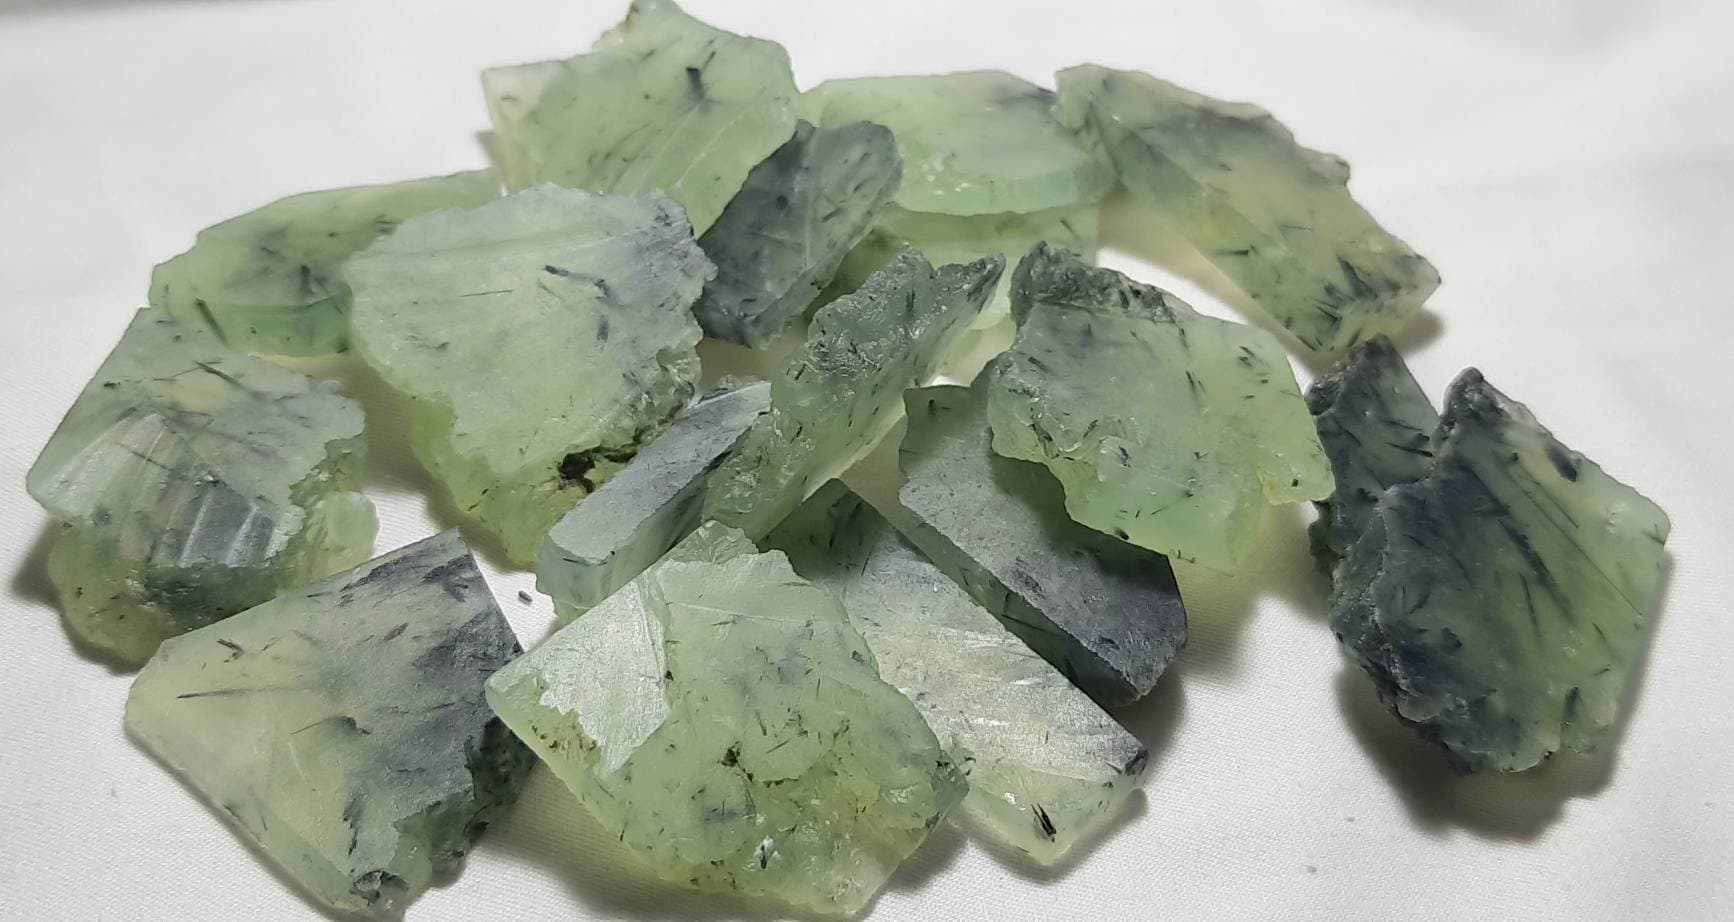 Details about   Finest Lot Natural Prehnite Chalcedony 3X3 mm Round Faceted Cut Loose Gemstone 